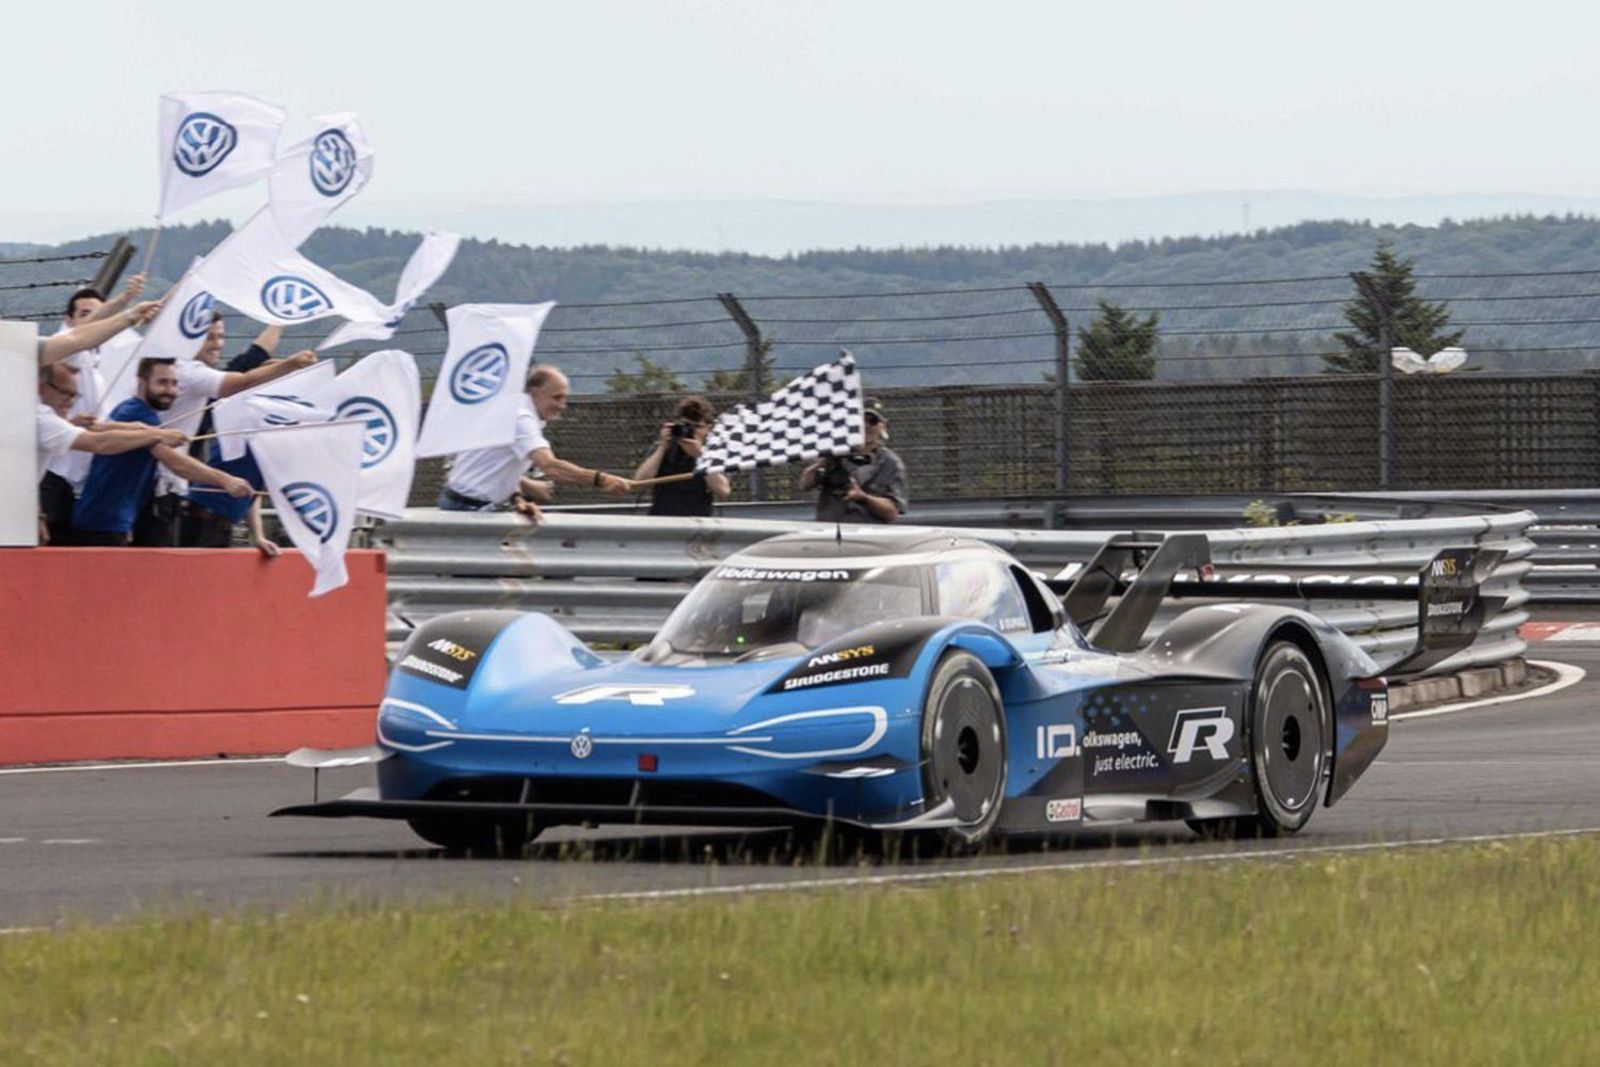 The Volkswagen ID R successfully makes a run.